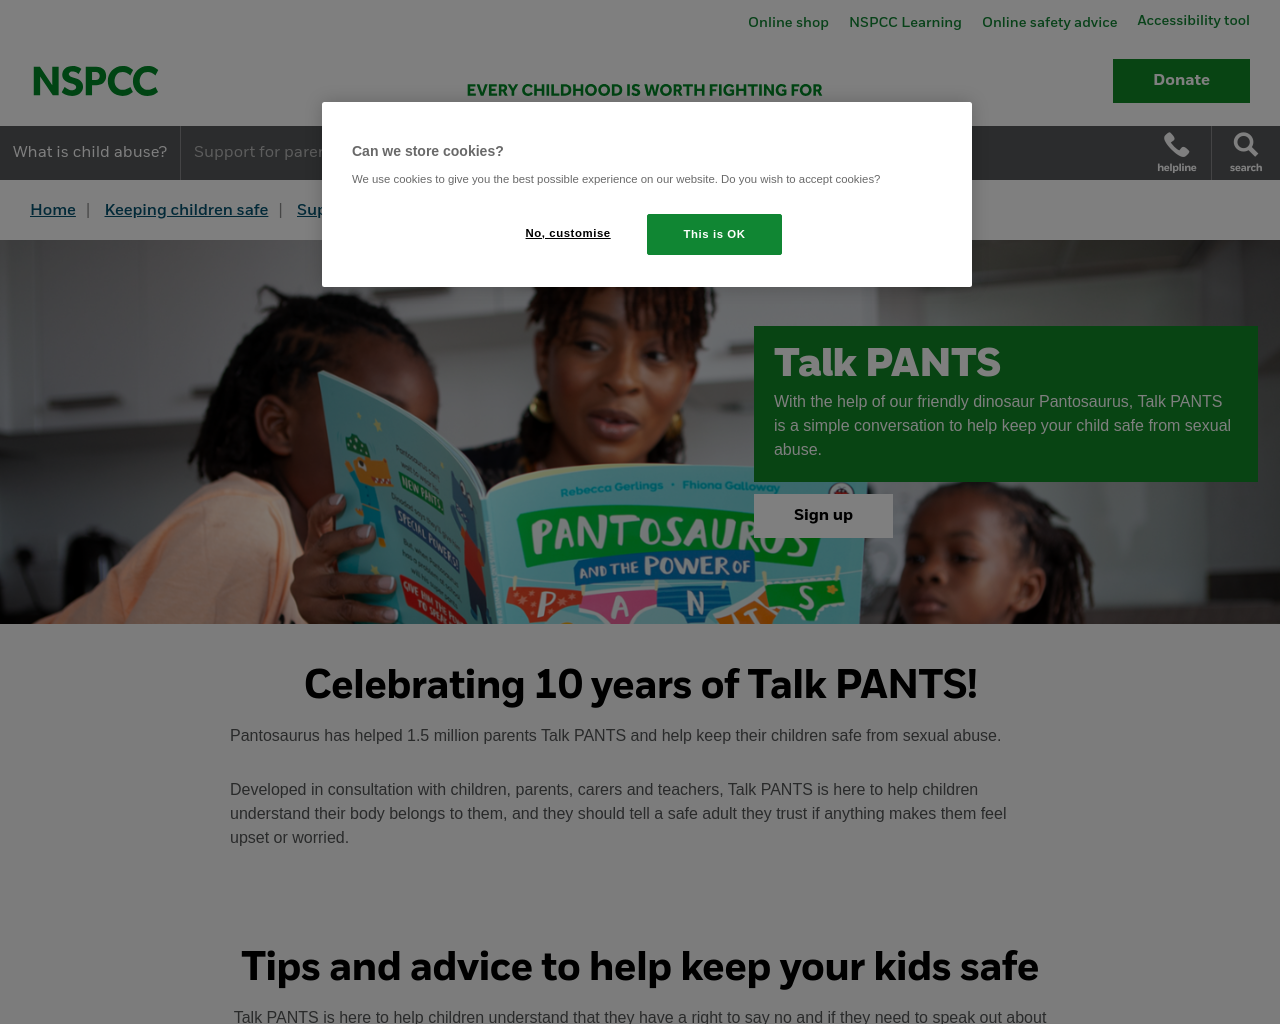 NSPCC Resources